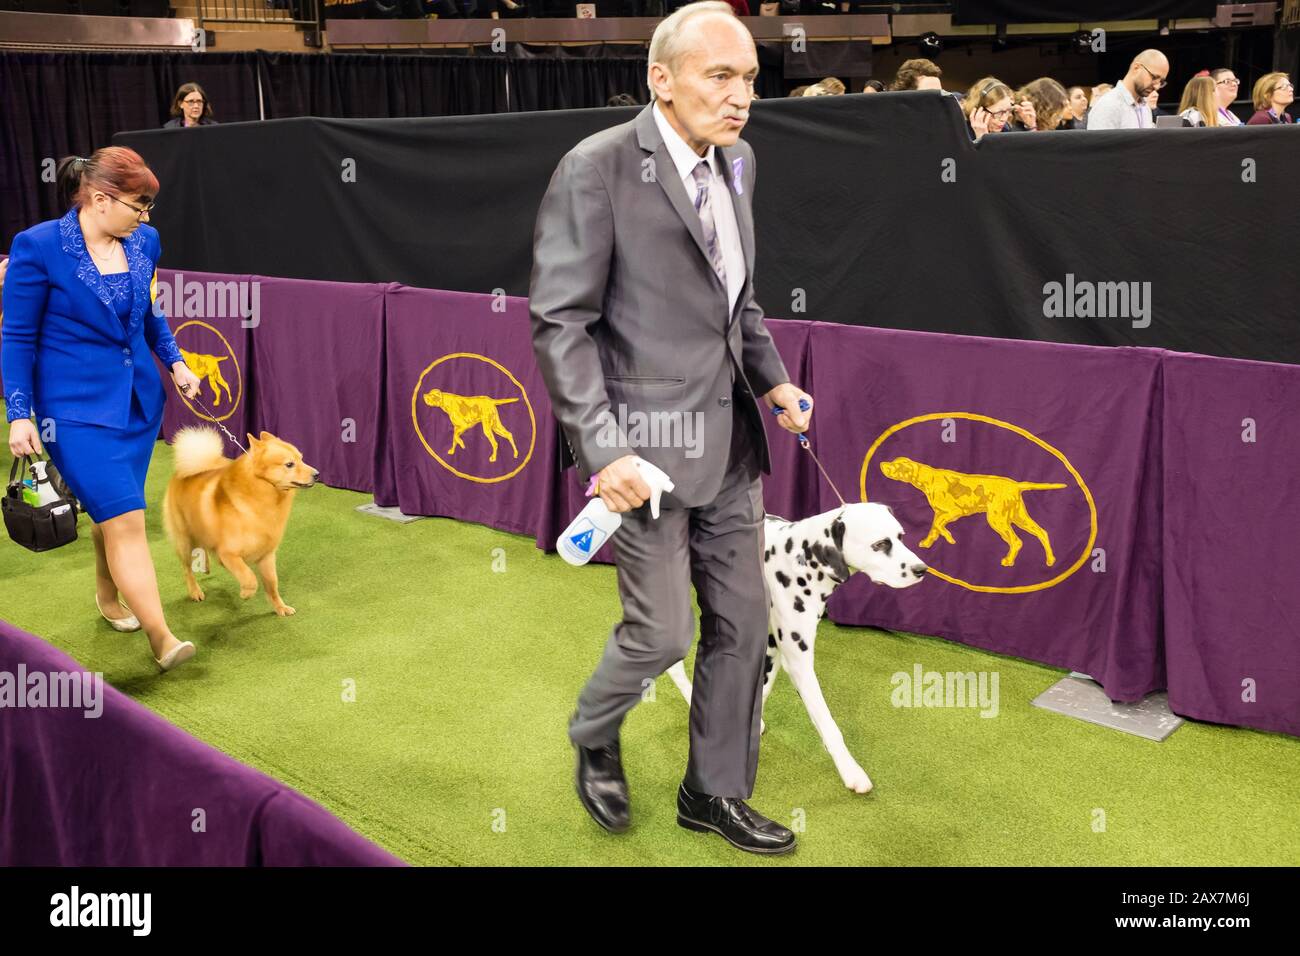 New York, NY, USA. 10th Feb, 2020. The non-sporting group enters the show ring at the 144th Westminster Kennel Club Dog show at New York's Madison Square Garden. Credit: Ed Lefkowicz/Alamy Live News Stock Photo